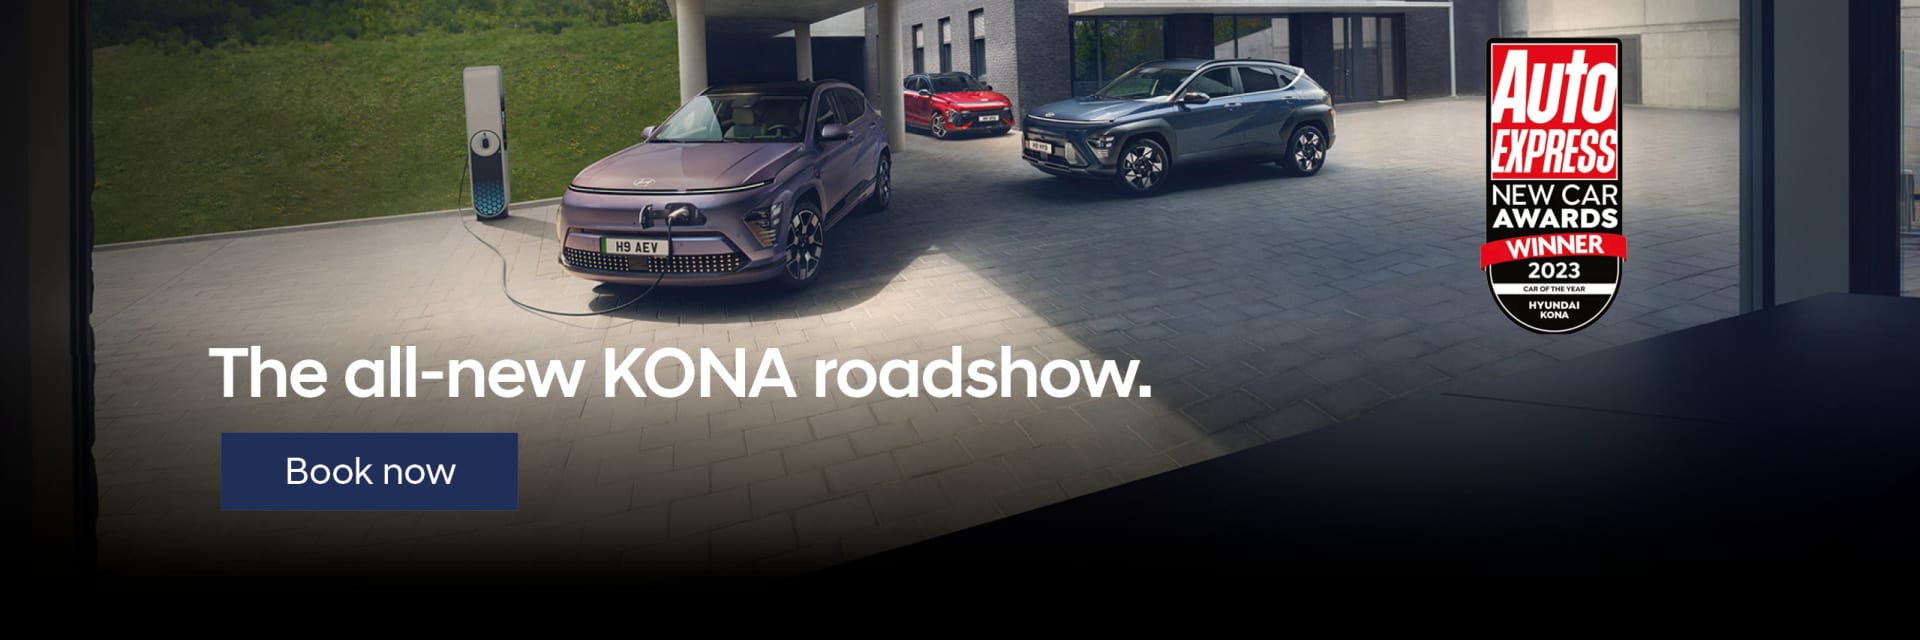 Introducing the all-new KONA.